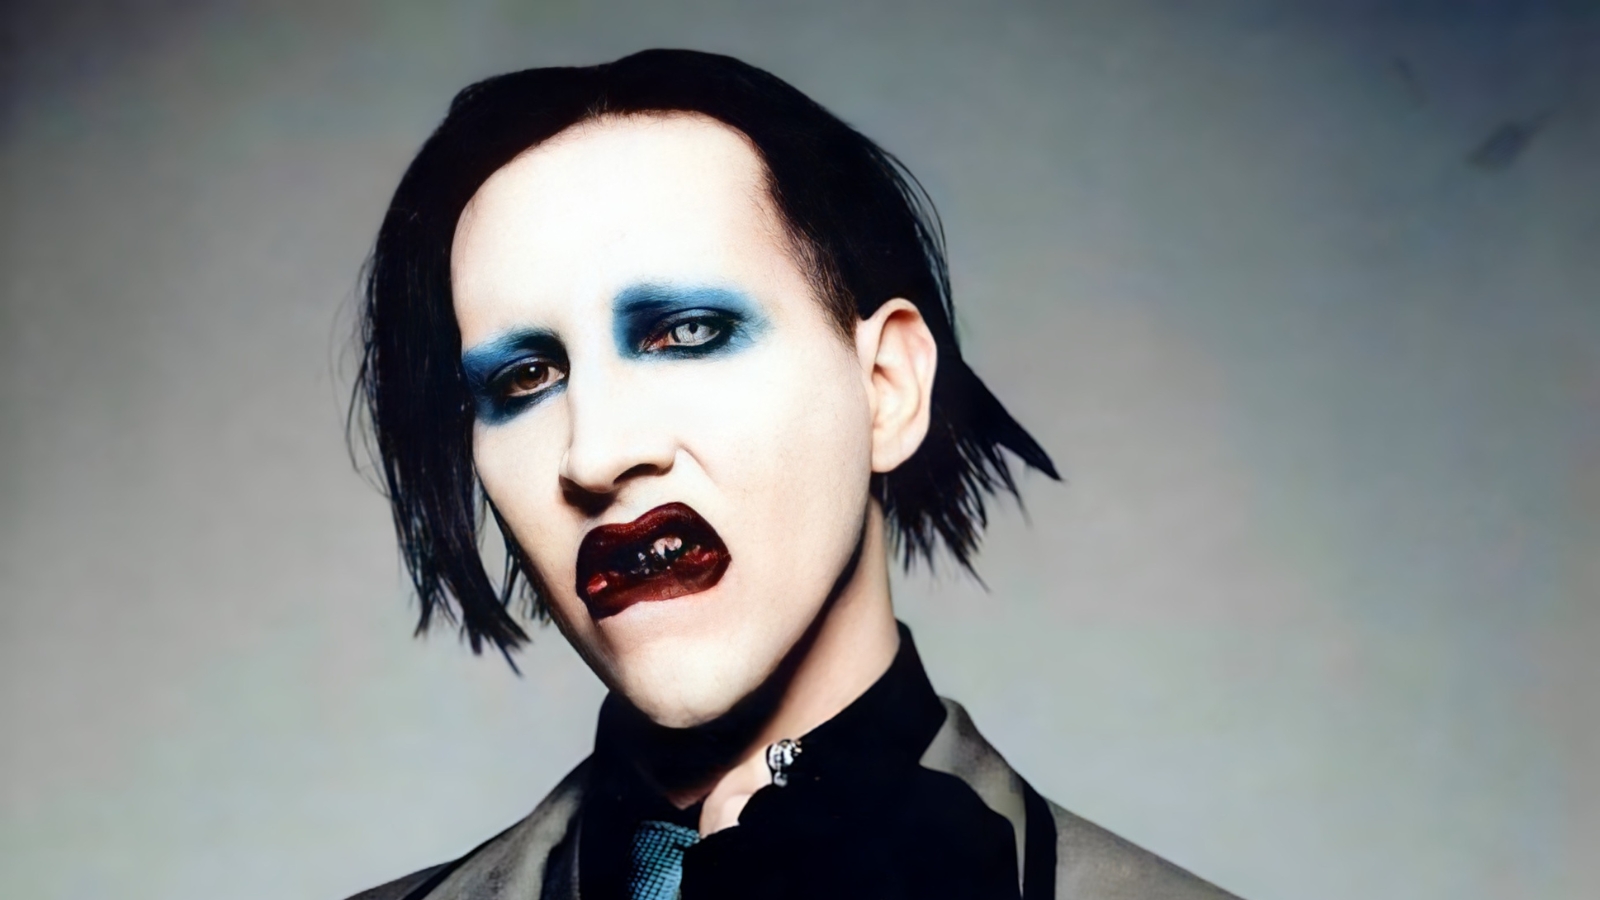 Marilyn Manson's Bodysuit and Contact Lenses